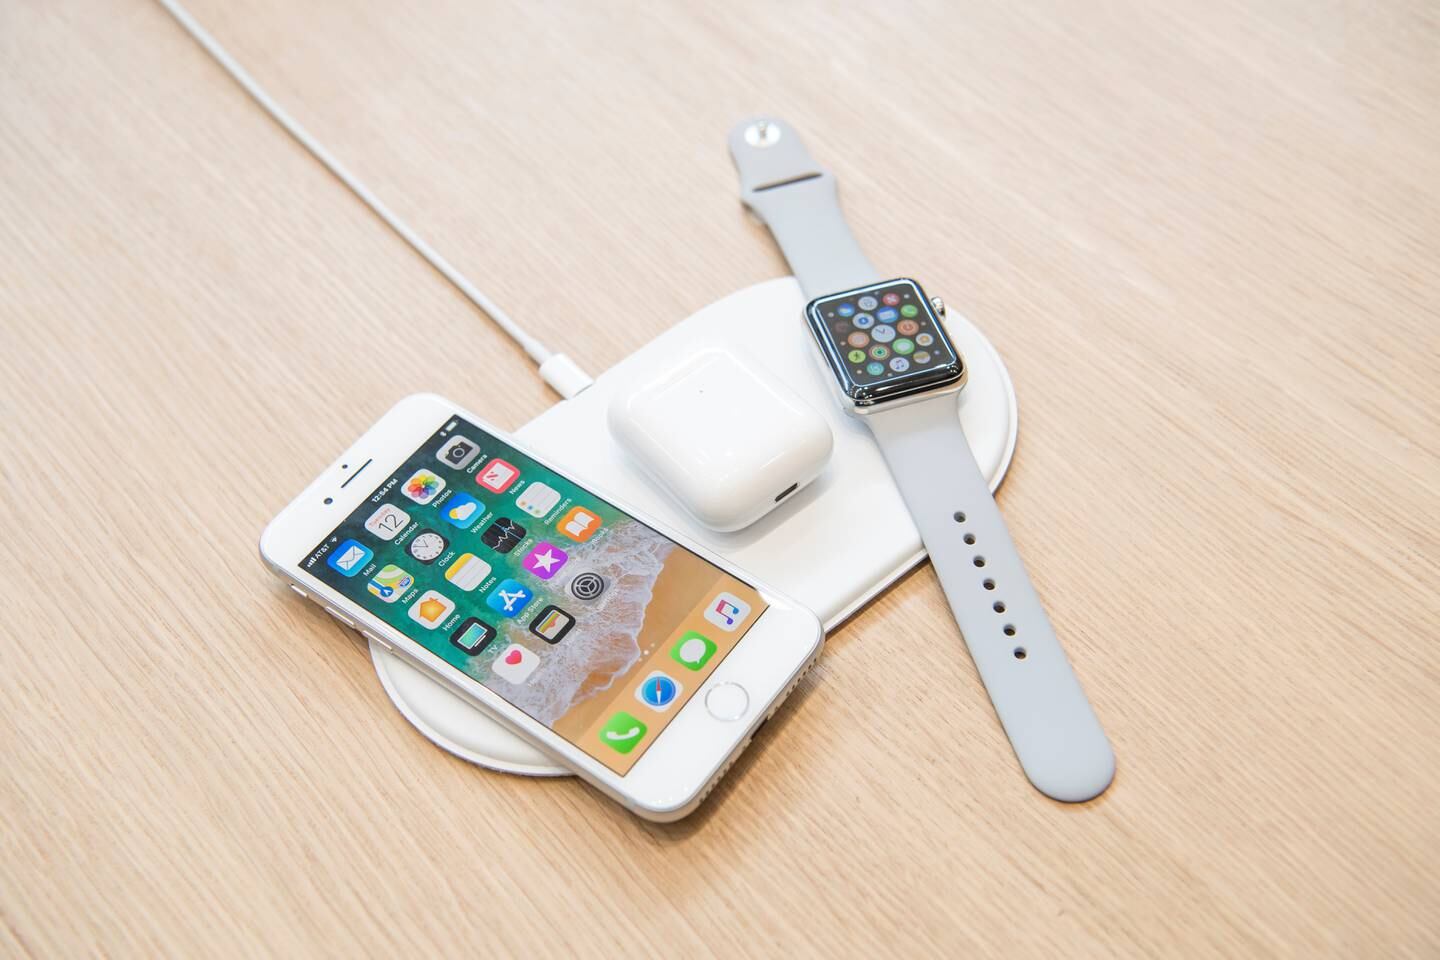 The Apple Inc. iPhone 8, Airpods, and Apple Watch sit on the AirPower charger during an event at the Steve Jobs Theater in Cupertino, California, U.S., on Tuesday, Sept. 12, 2017. Apple Inc. unveiled its most important new iPhone for years to take on growing competition from Samsung Electronics Co., Google and a host of Chinese smartphone makers. The device, coming a decade after the original model, is Apple's first major redesign since 2014 and represents a significant upgrade to the iPhone 7 line. Photographer: David Paul Morris/Bloomberg